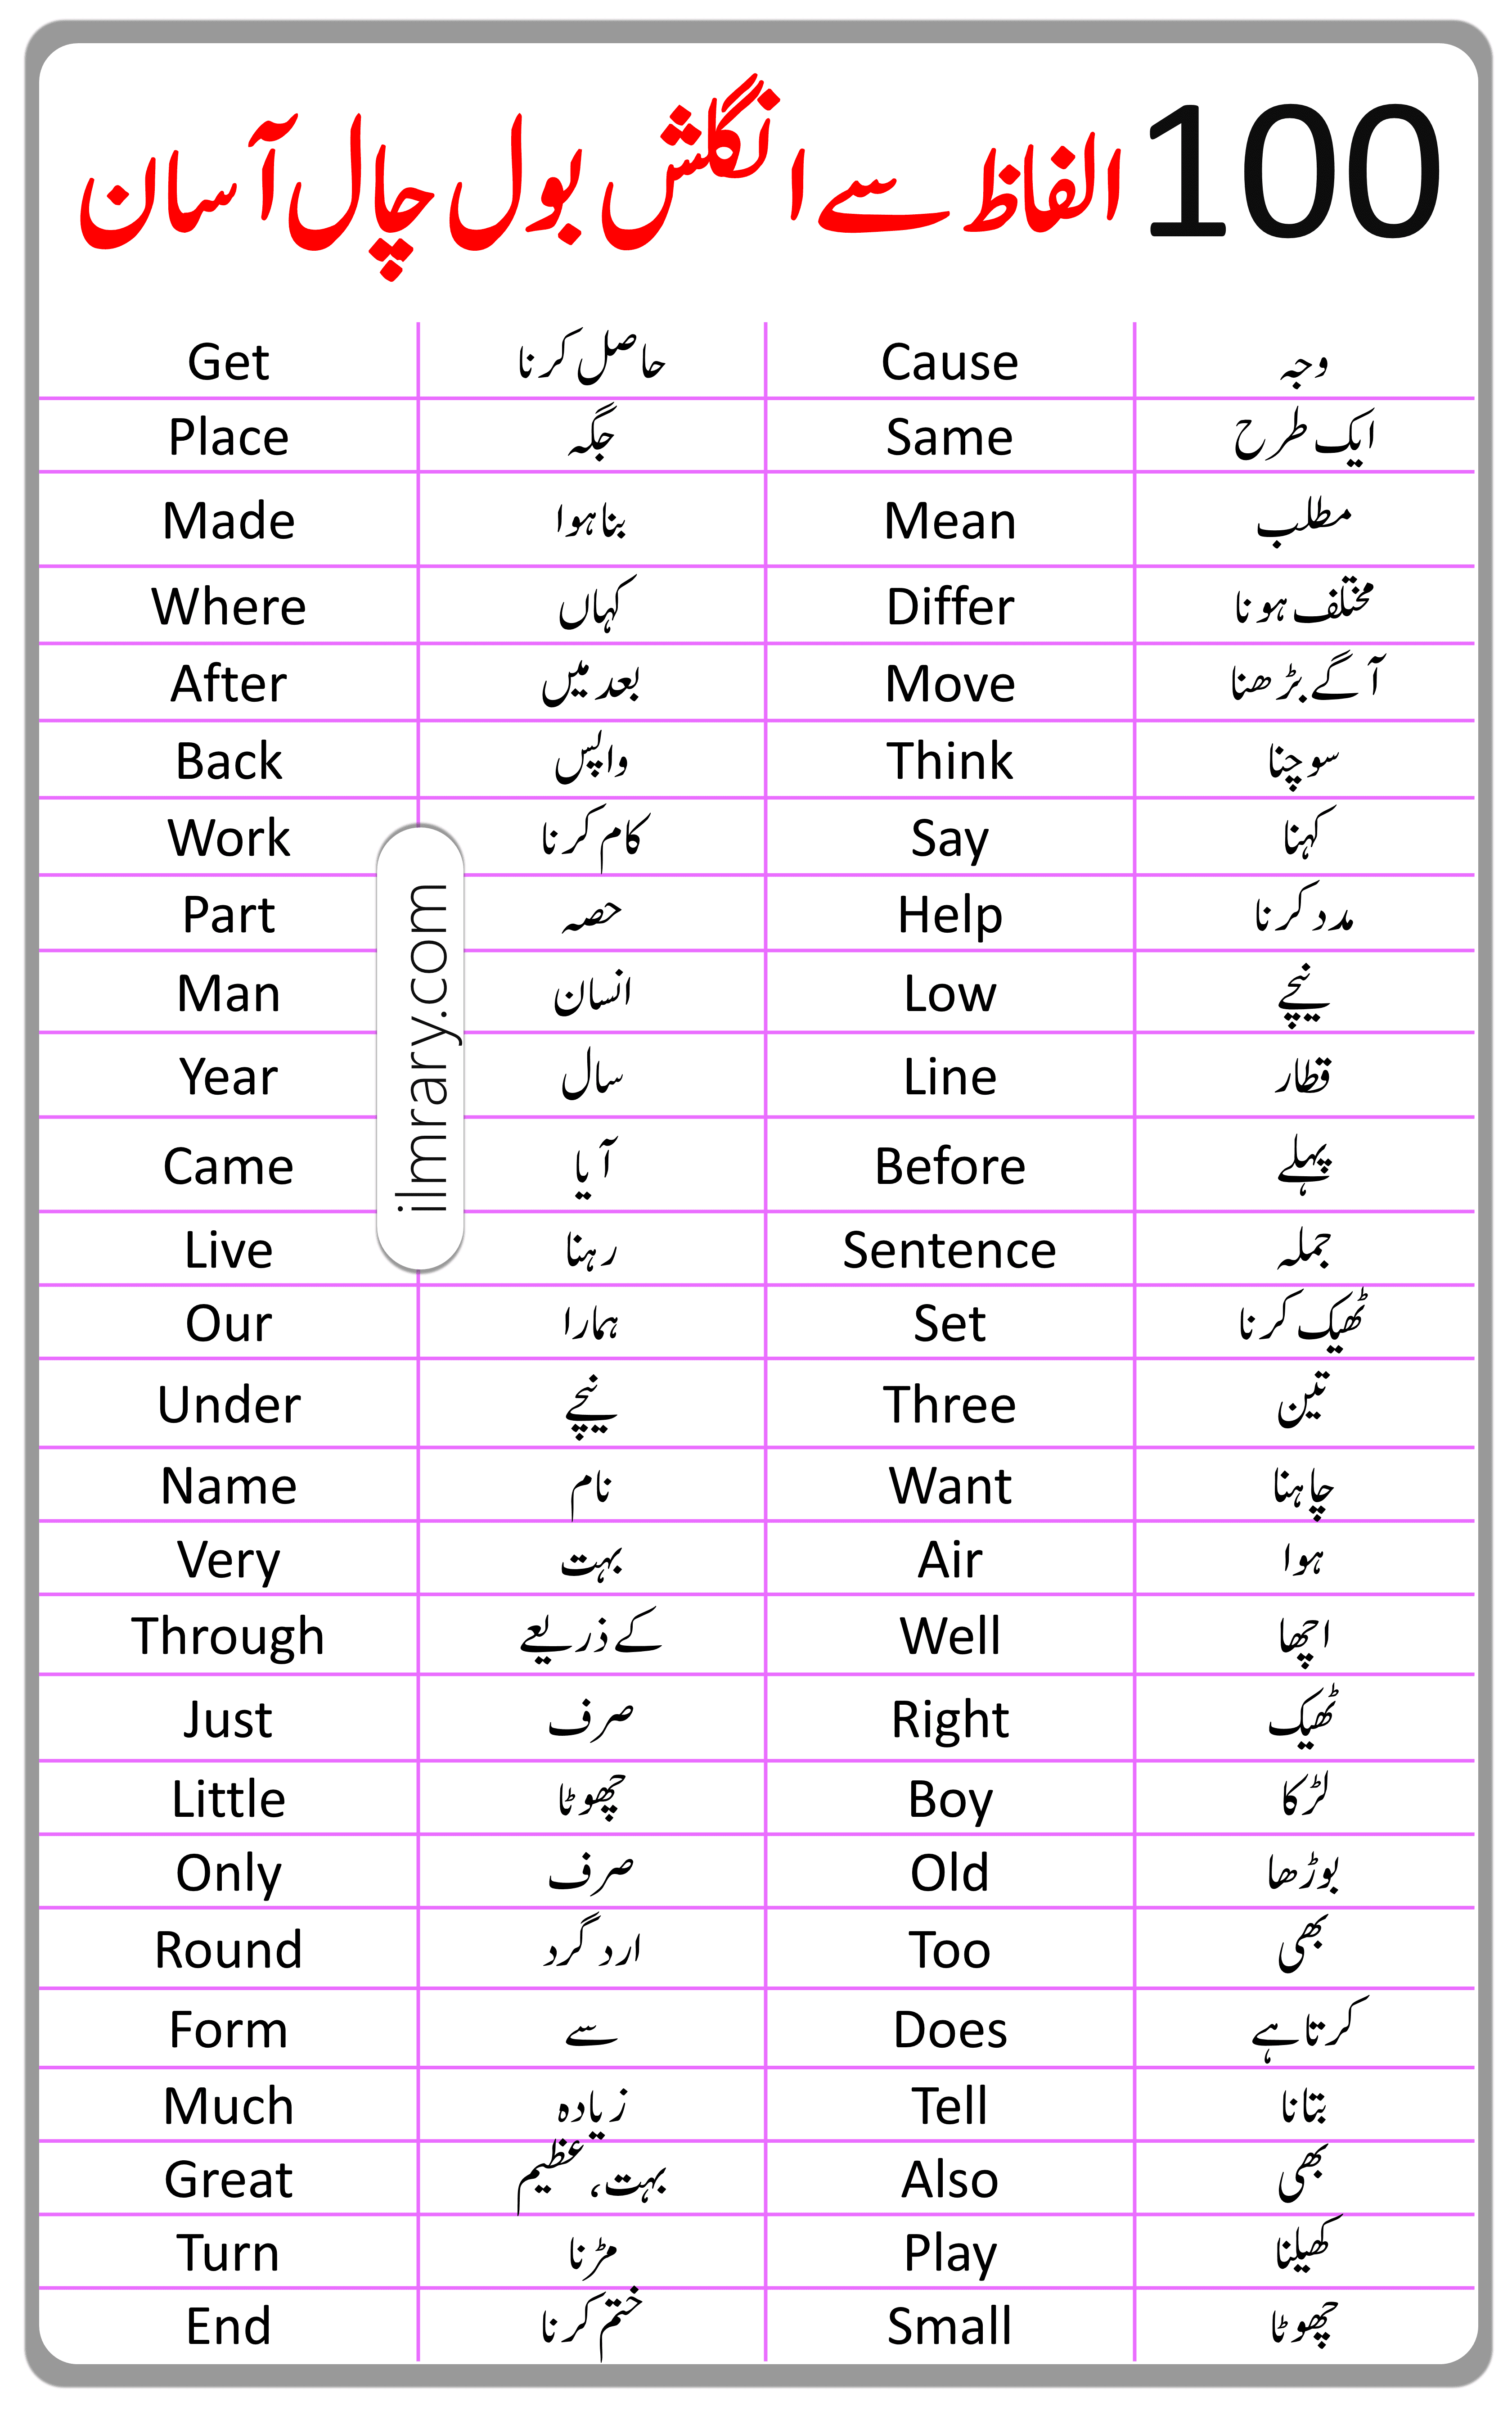 2000 Basic English Vocabulary Words with Urdu Meanings